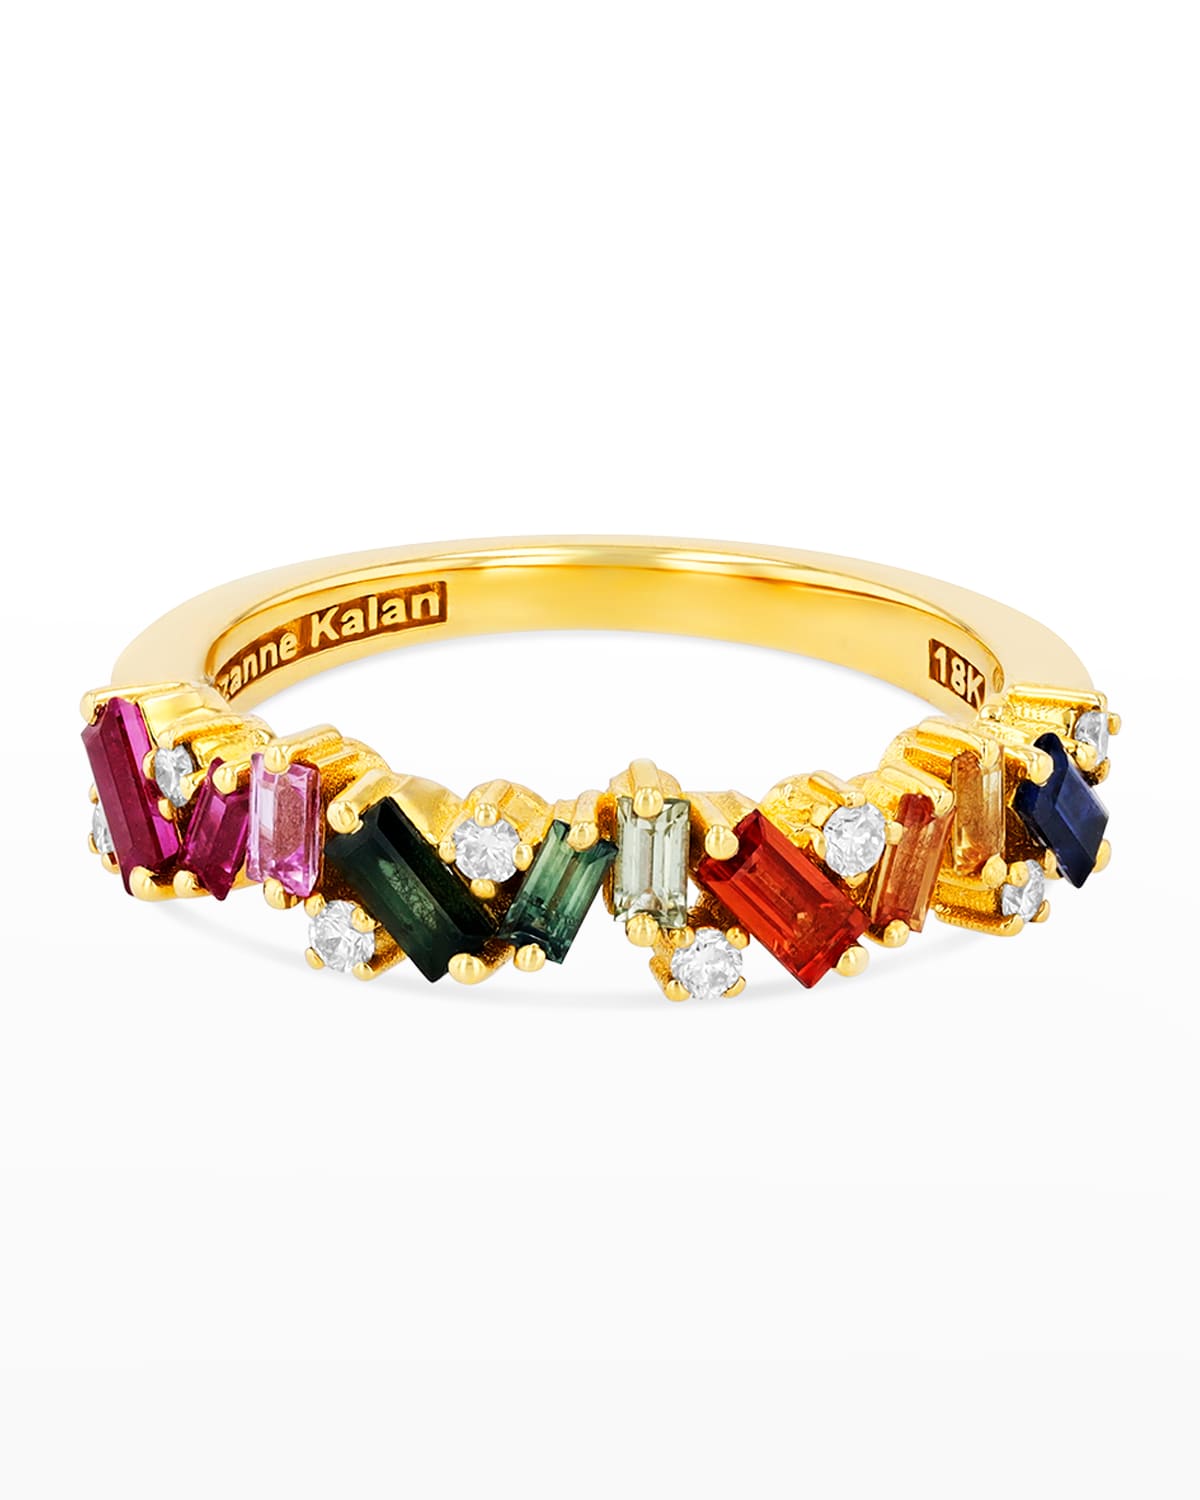 Suzanne Kalan 18k Rainbow Fireworks Frenzy Half-band Ring Size 4-8 In Yellow/gold